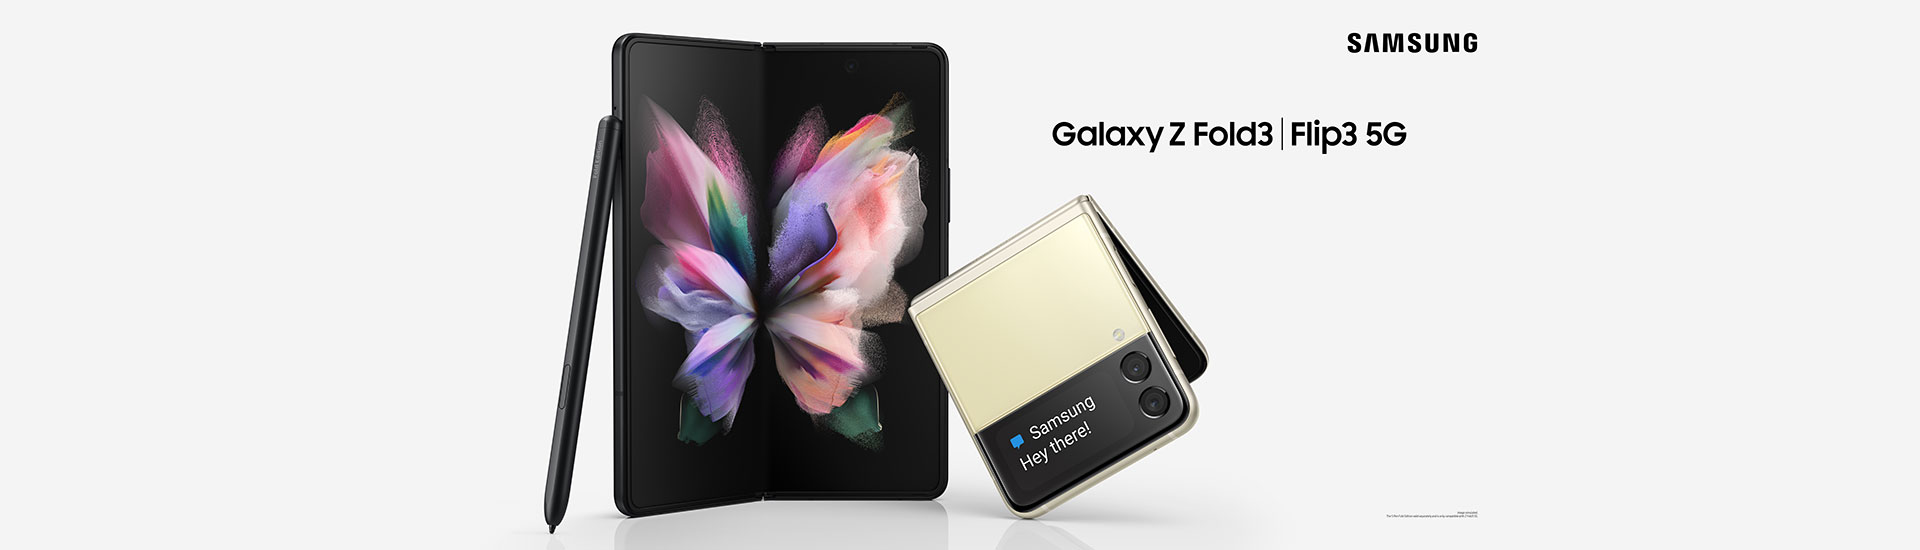 Galaxy Z Fold3 5G Pre-order to free premium (Total value $2,196). Galaxy Z Flip3 5G Pre-order to free Silicone Cover with Strap (value $398) and 1 year Screen Protection by Samsung Care+. $7,000 discount upon subscribe Newest 5G Infinity Data Bundle Offer. Free delivery.